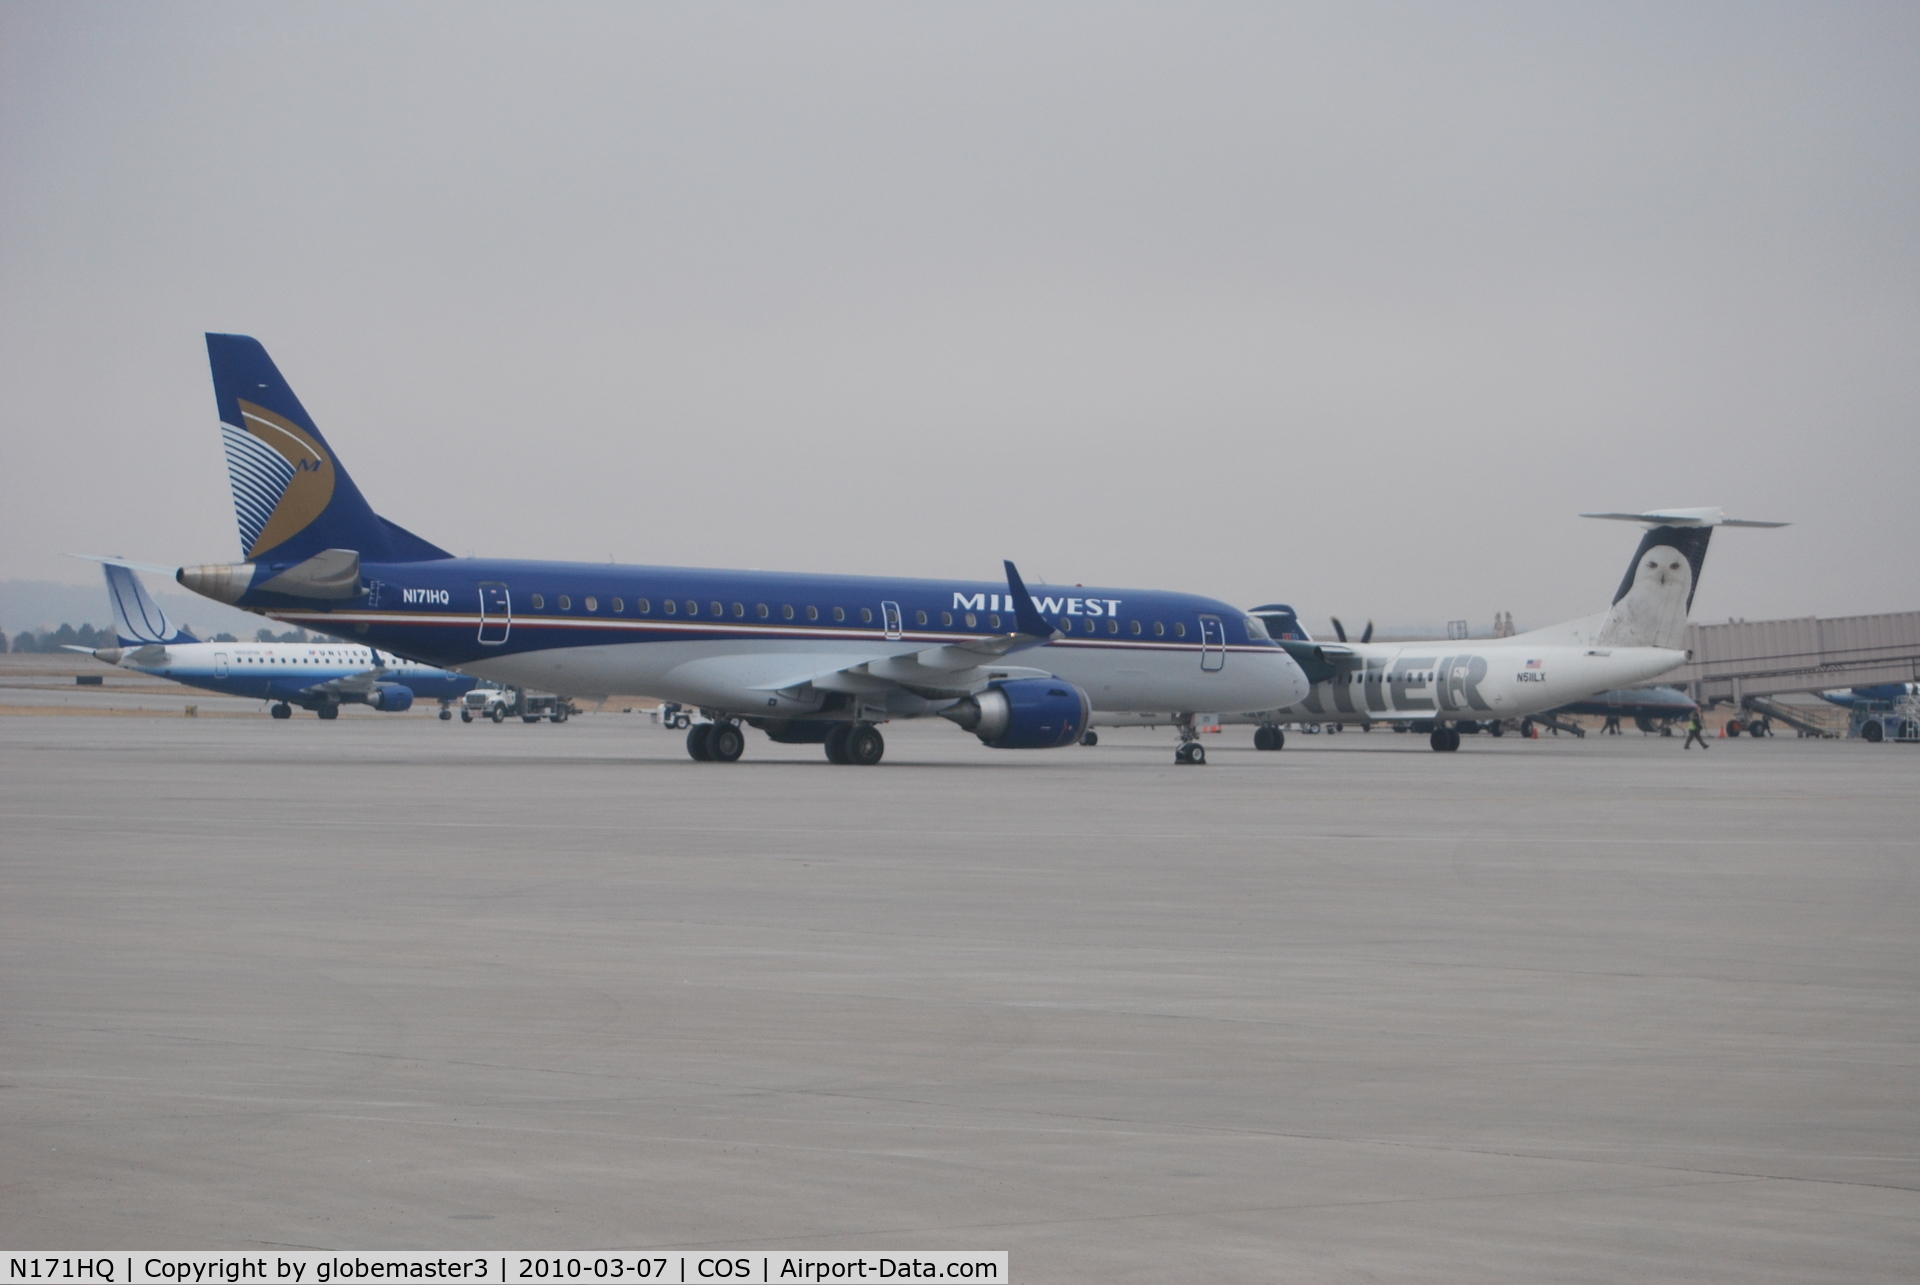 N171HQ, 2008 Embraer 190AR (ERJ-190-100IGW) C/N 19000197, midwest airlines ERJ190 at COS, due to ground stop @ DEN